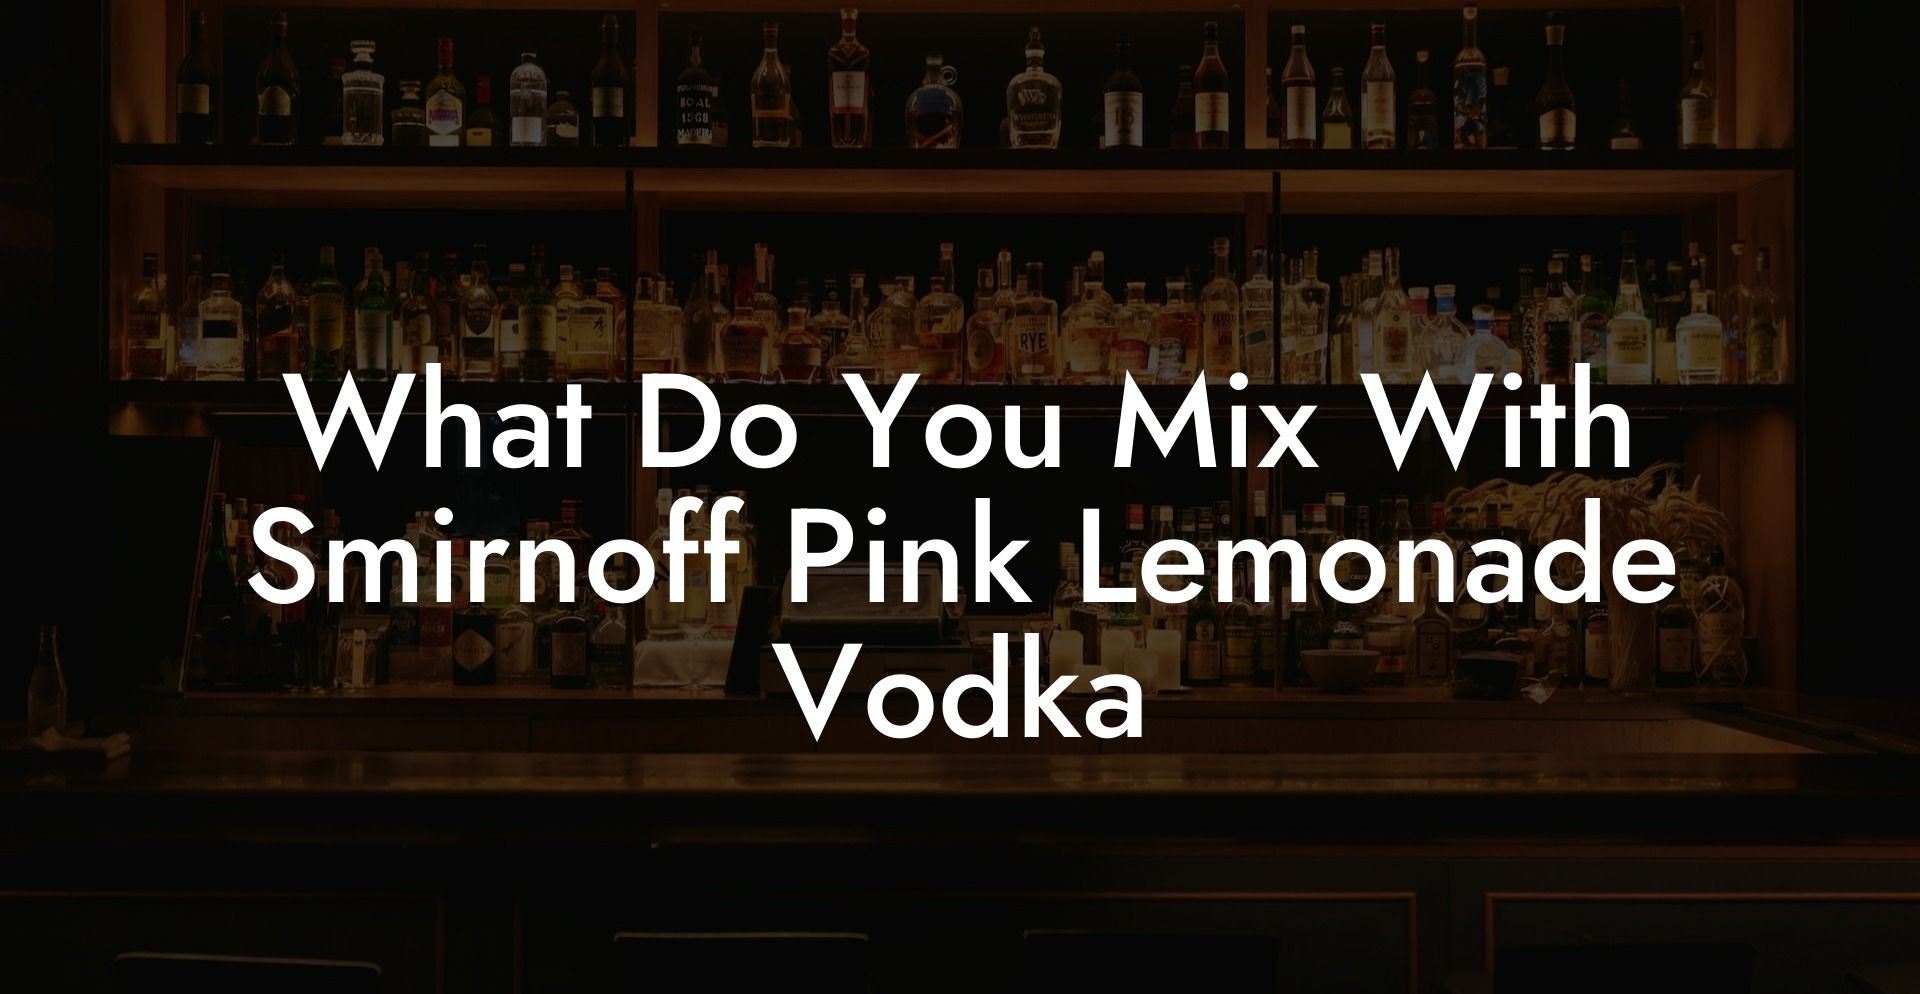 What Do You Mix With Smirnoff Pink Lemonade Vodka